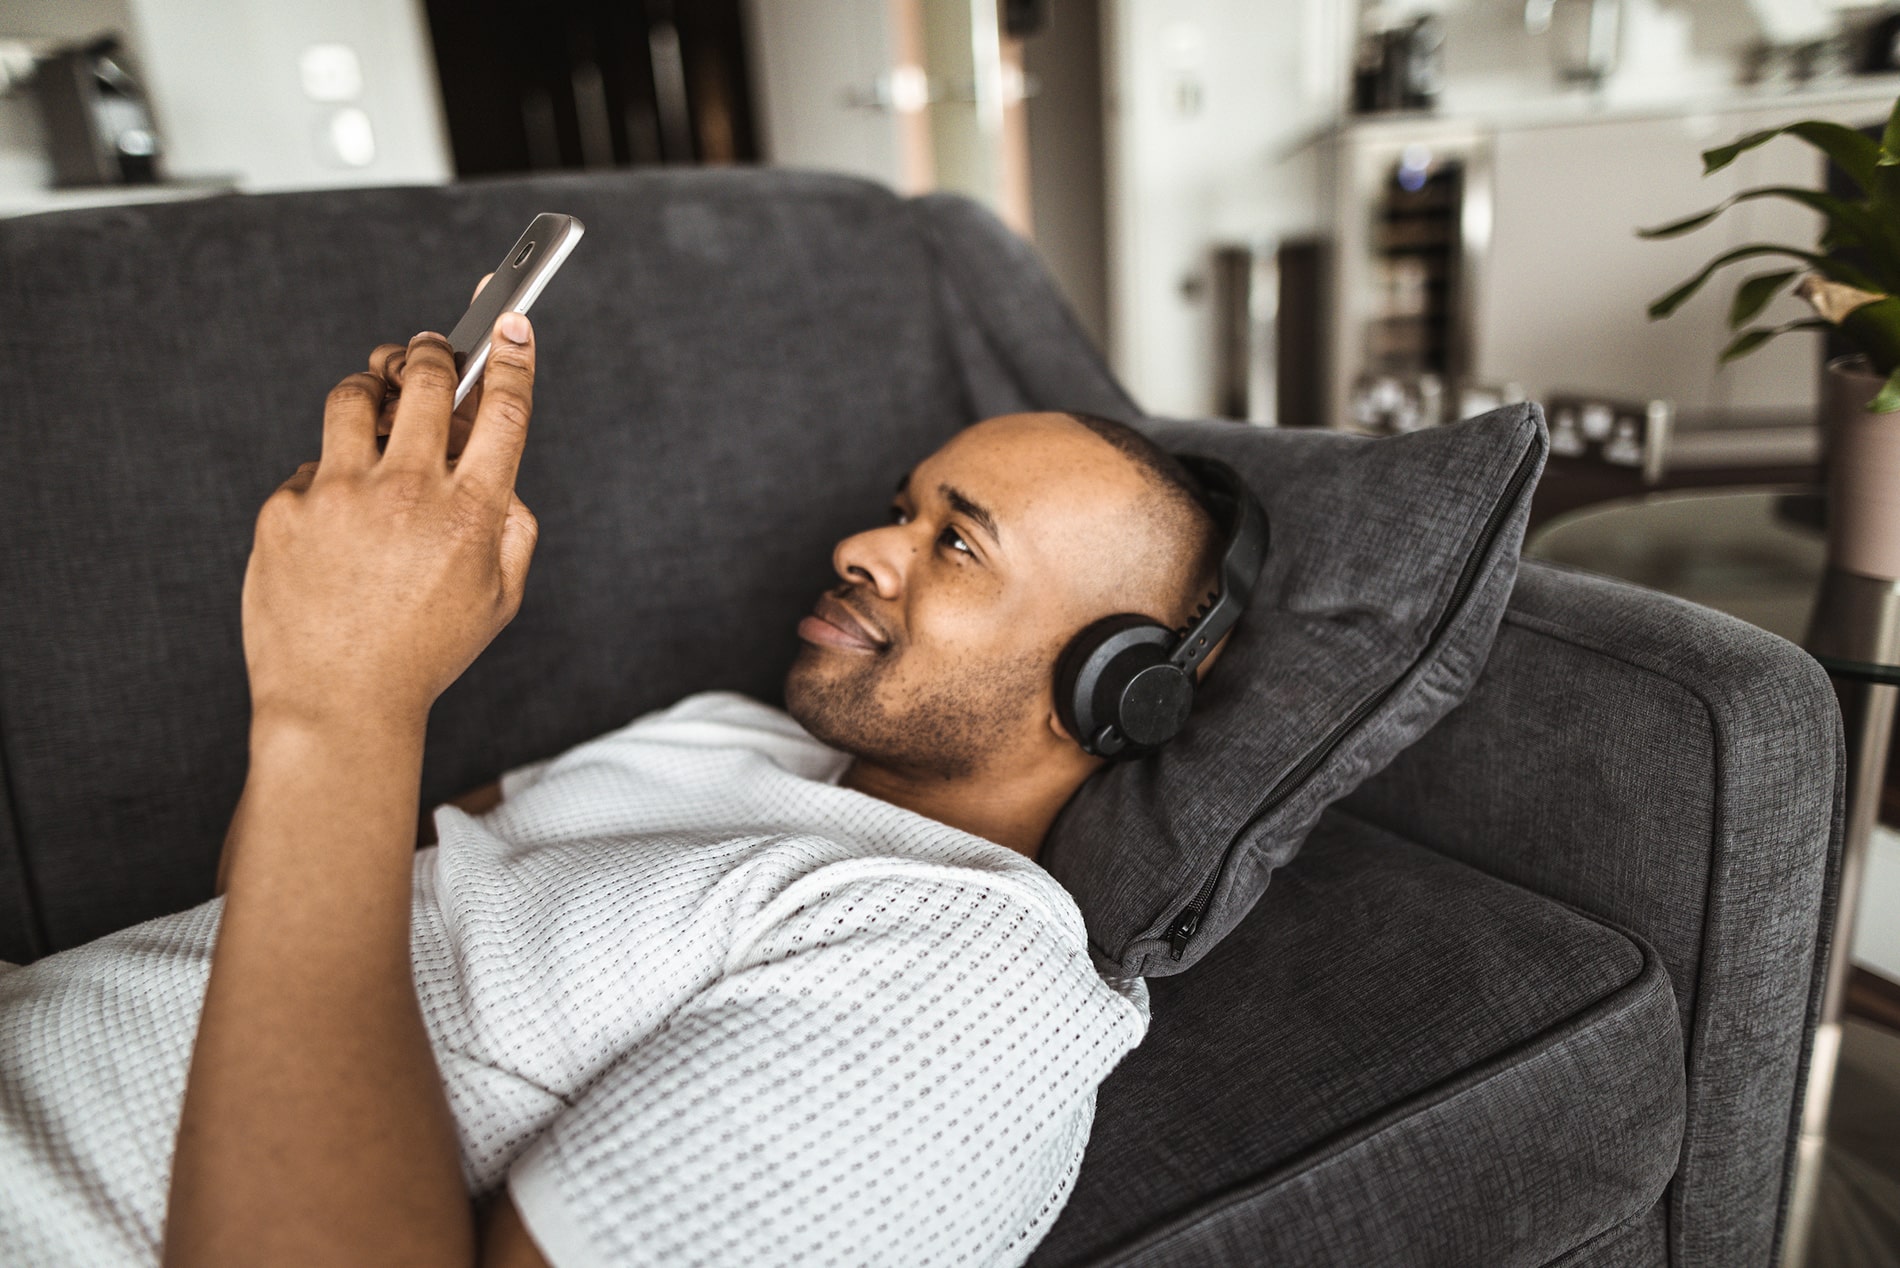 African American man on couch scrolling on phone